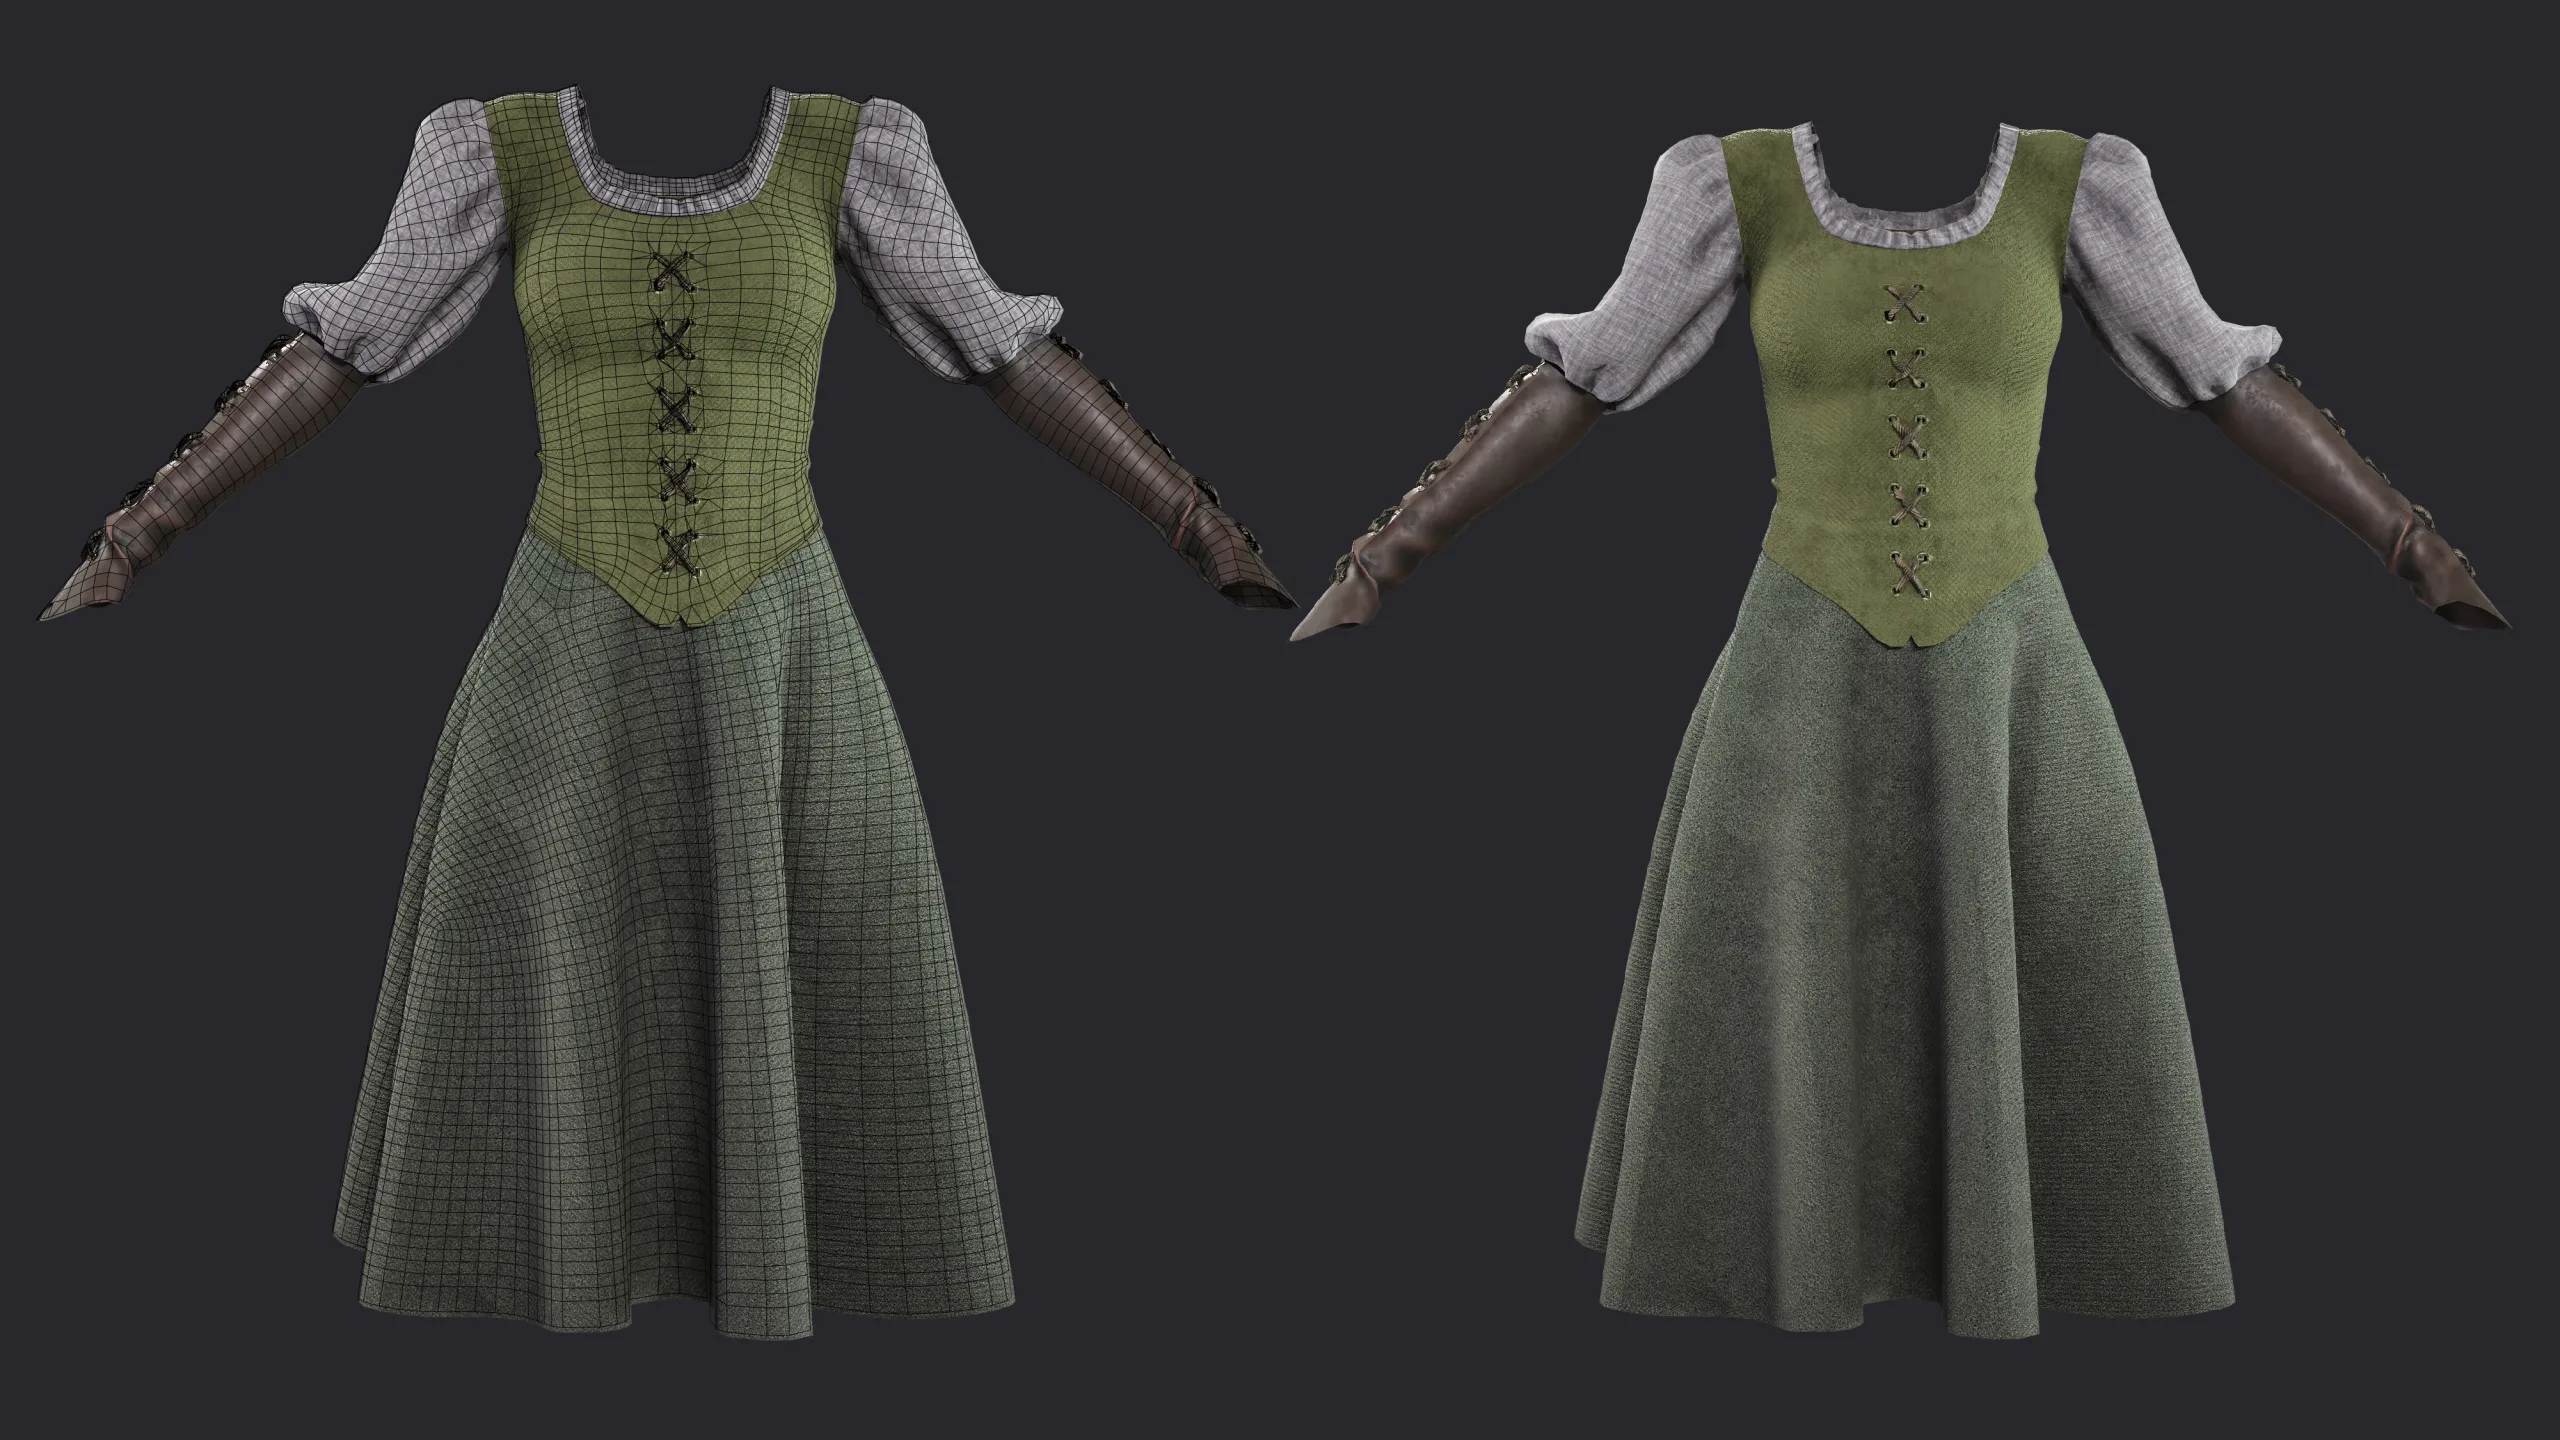 Female medieval character dress